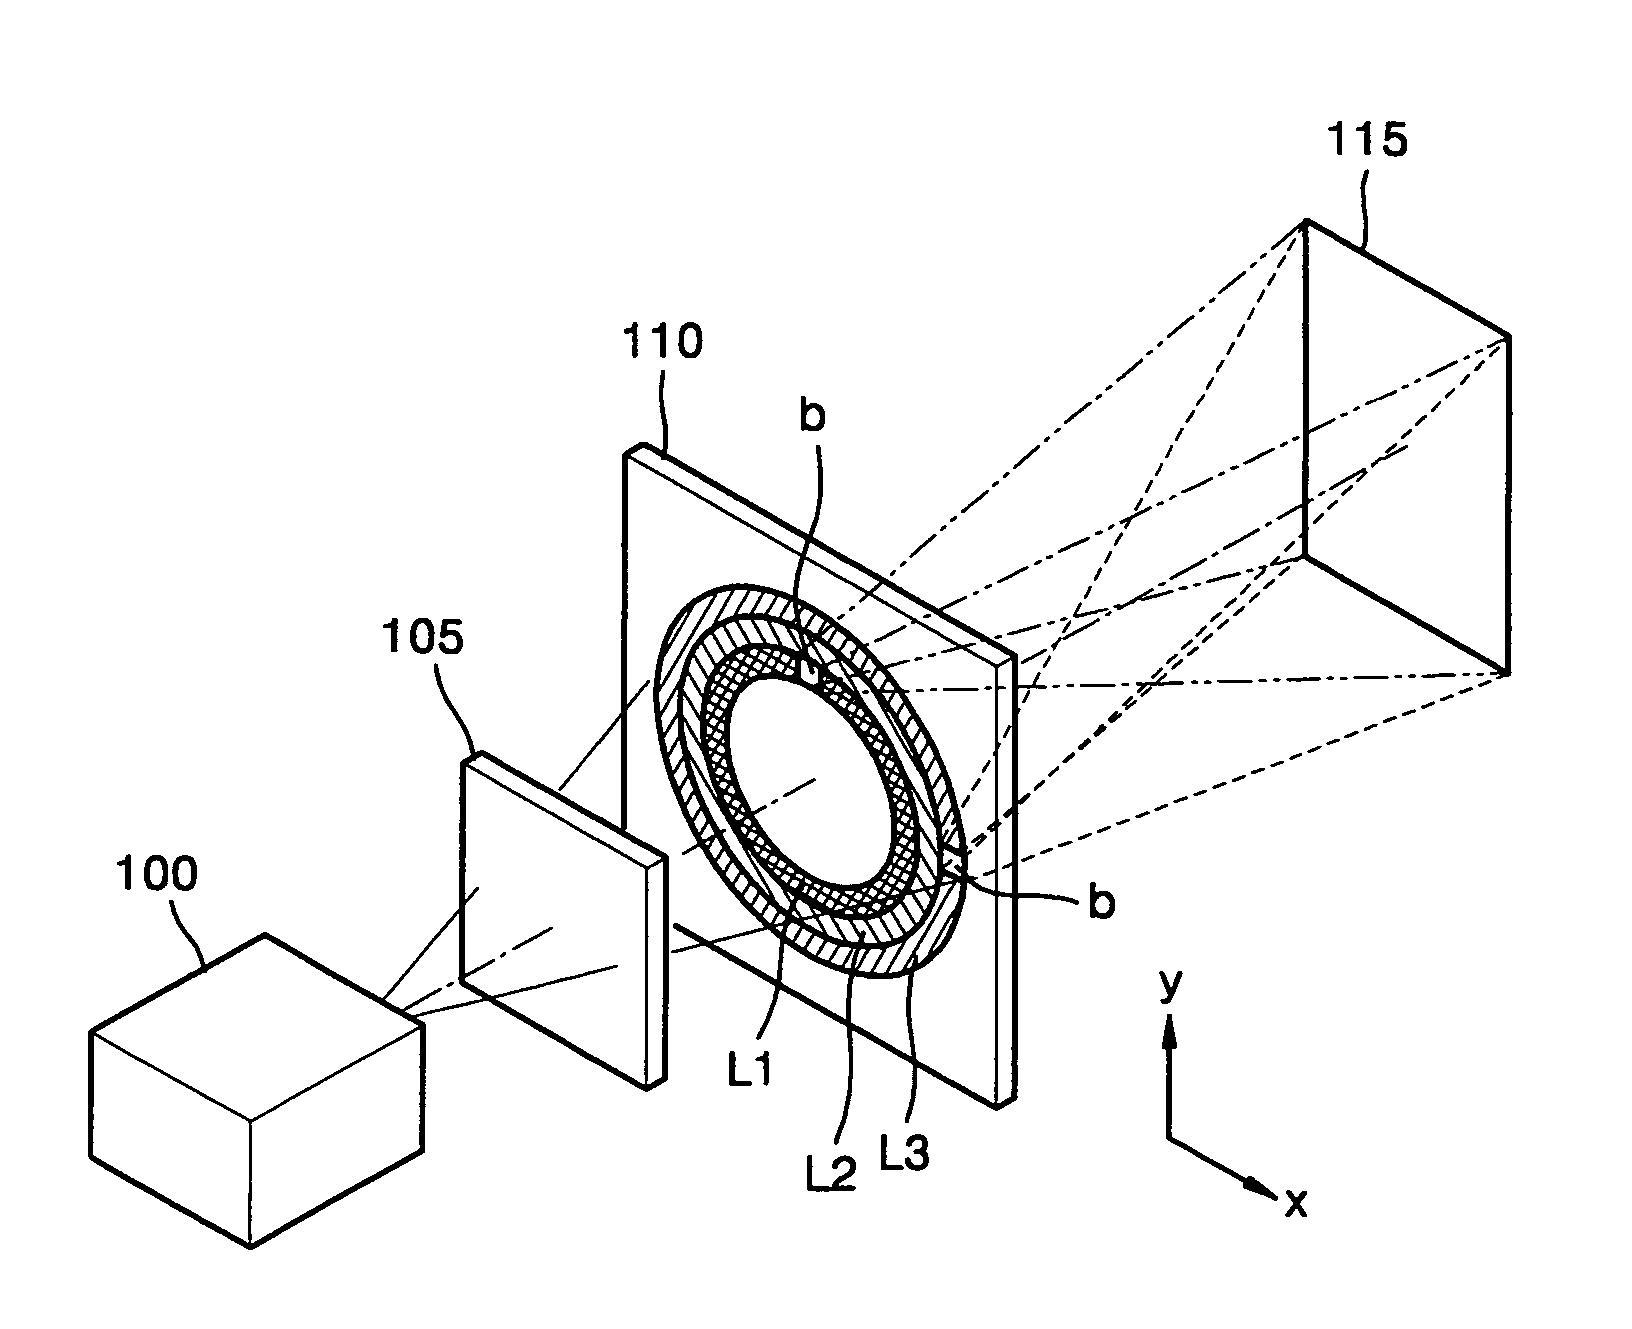 Illumination system eliminating laser speckle and projection TV employing the same